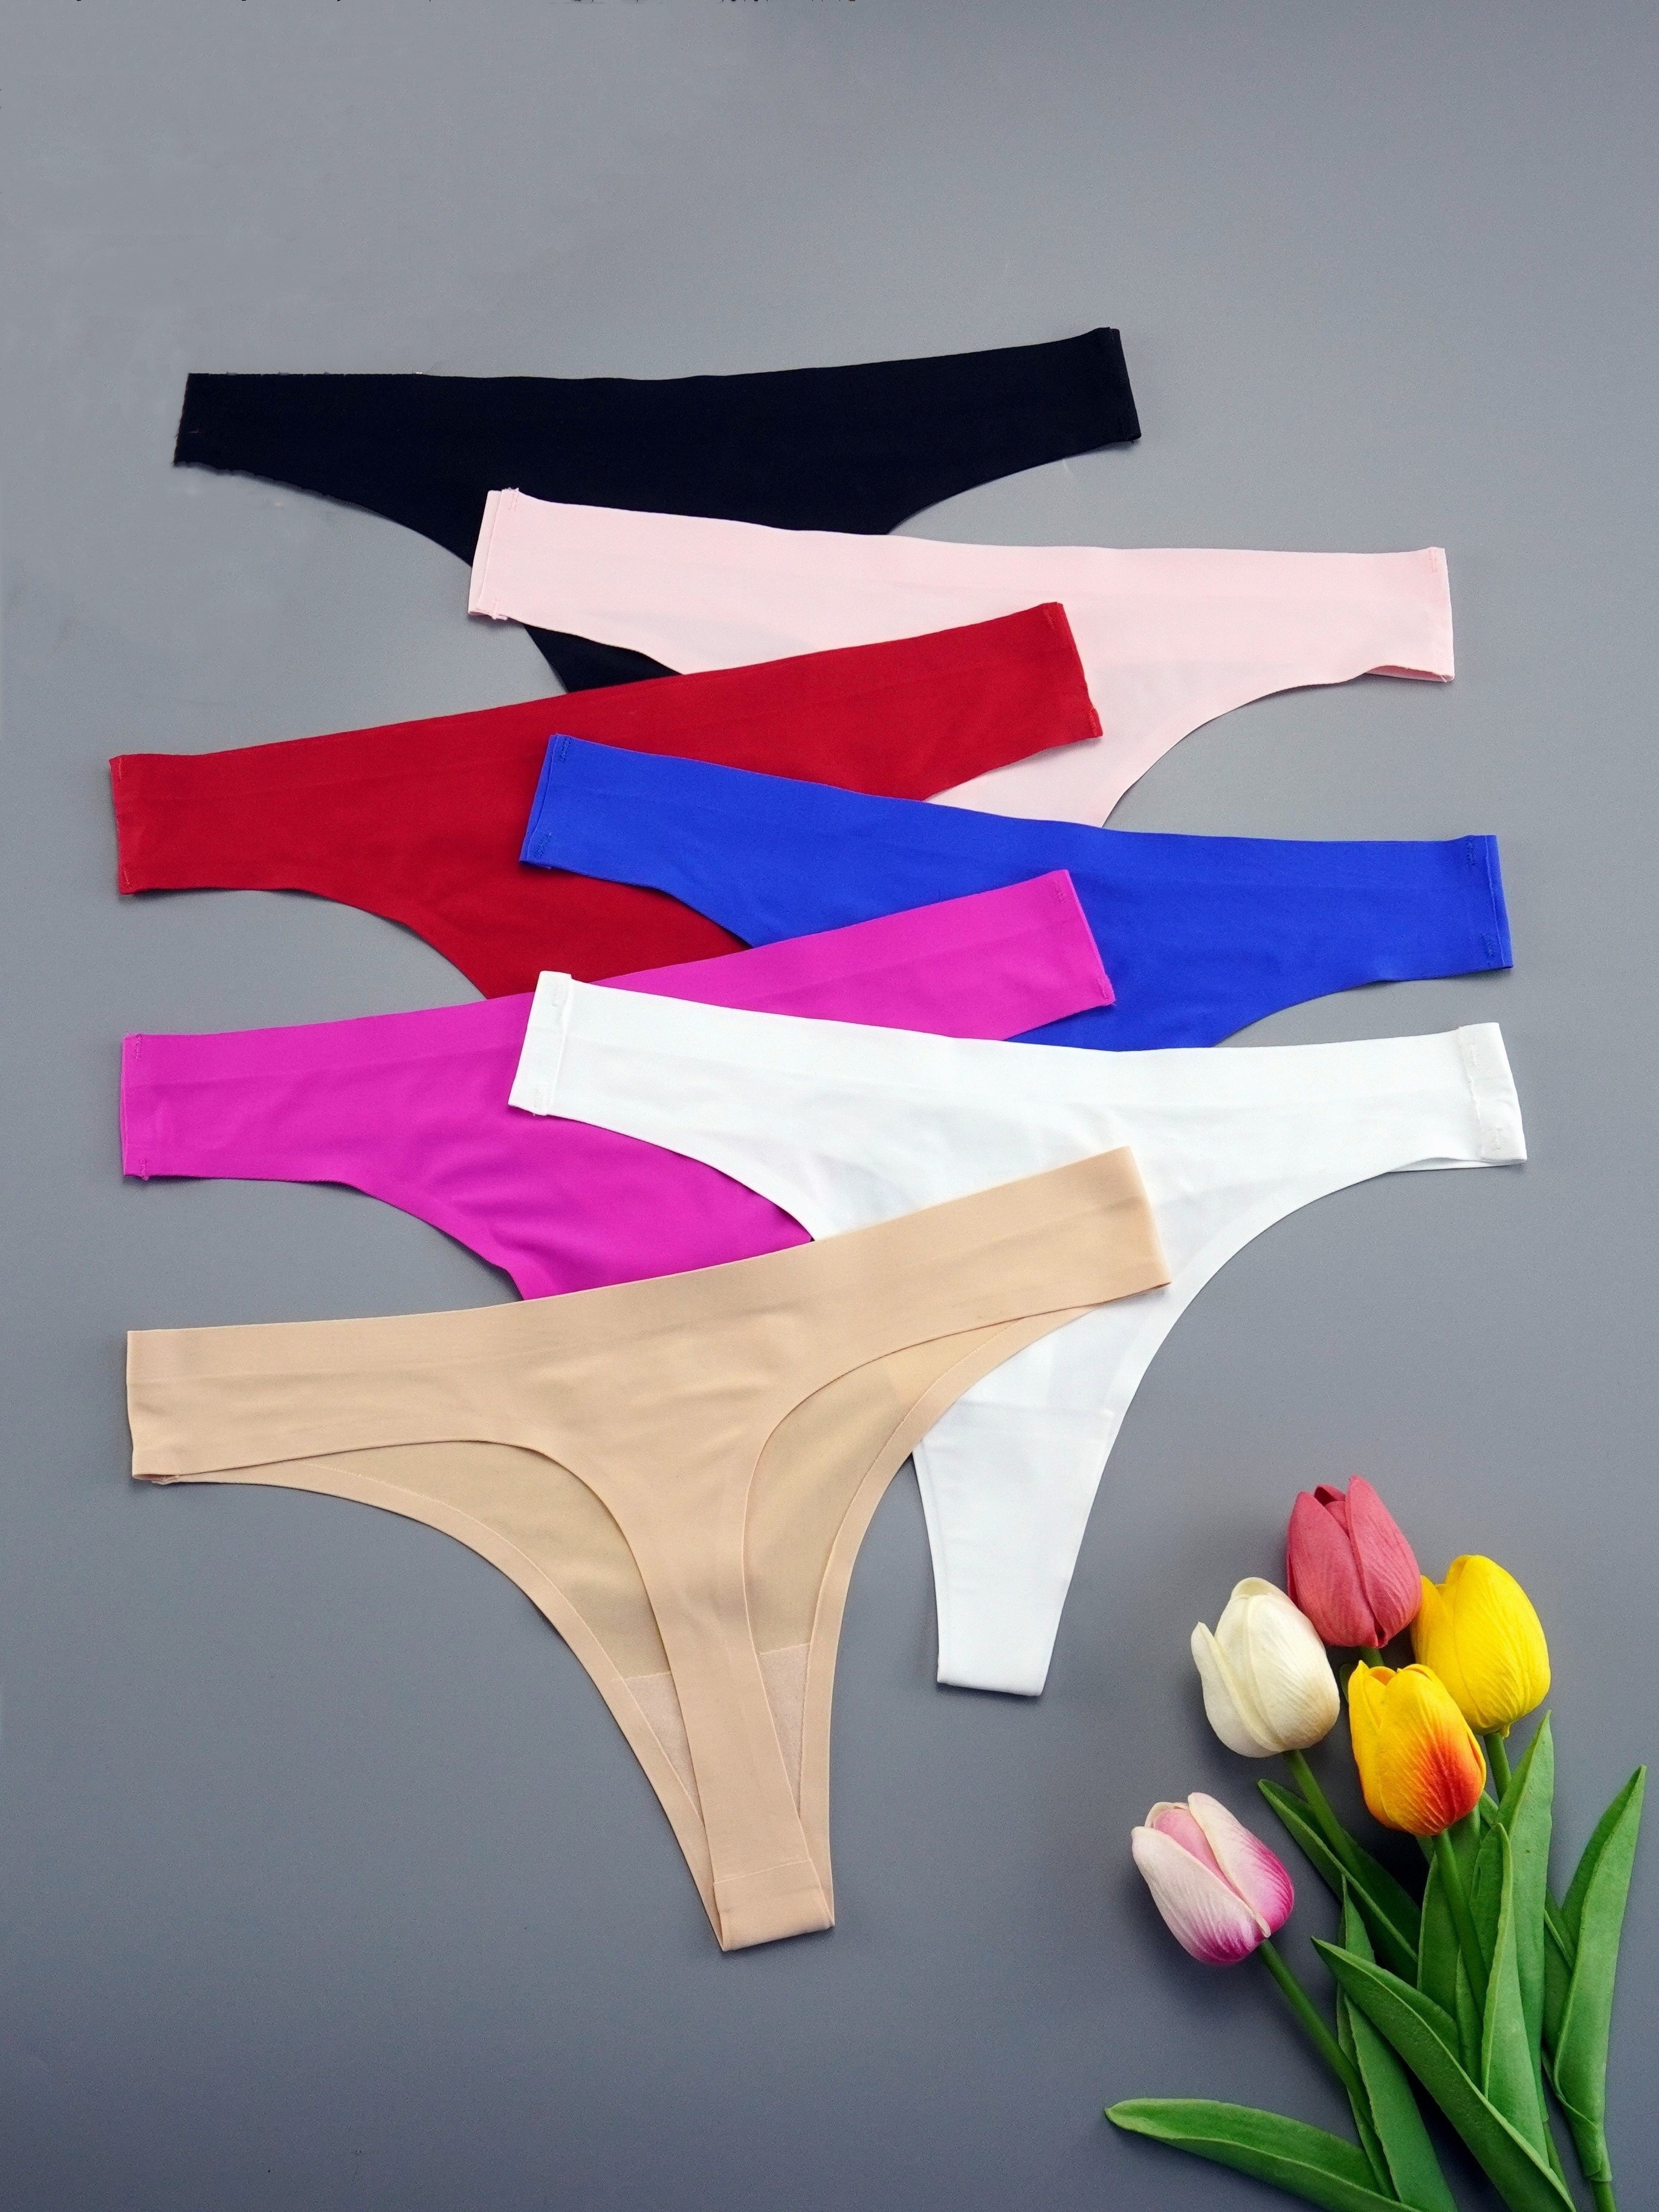 6 Pcs Thong Underwear For Women, Floral Print Breathable Cotton Womens  Thongs Underwear Seamless Thongs For Women